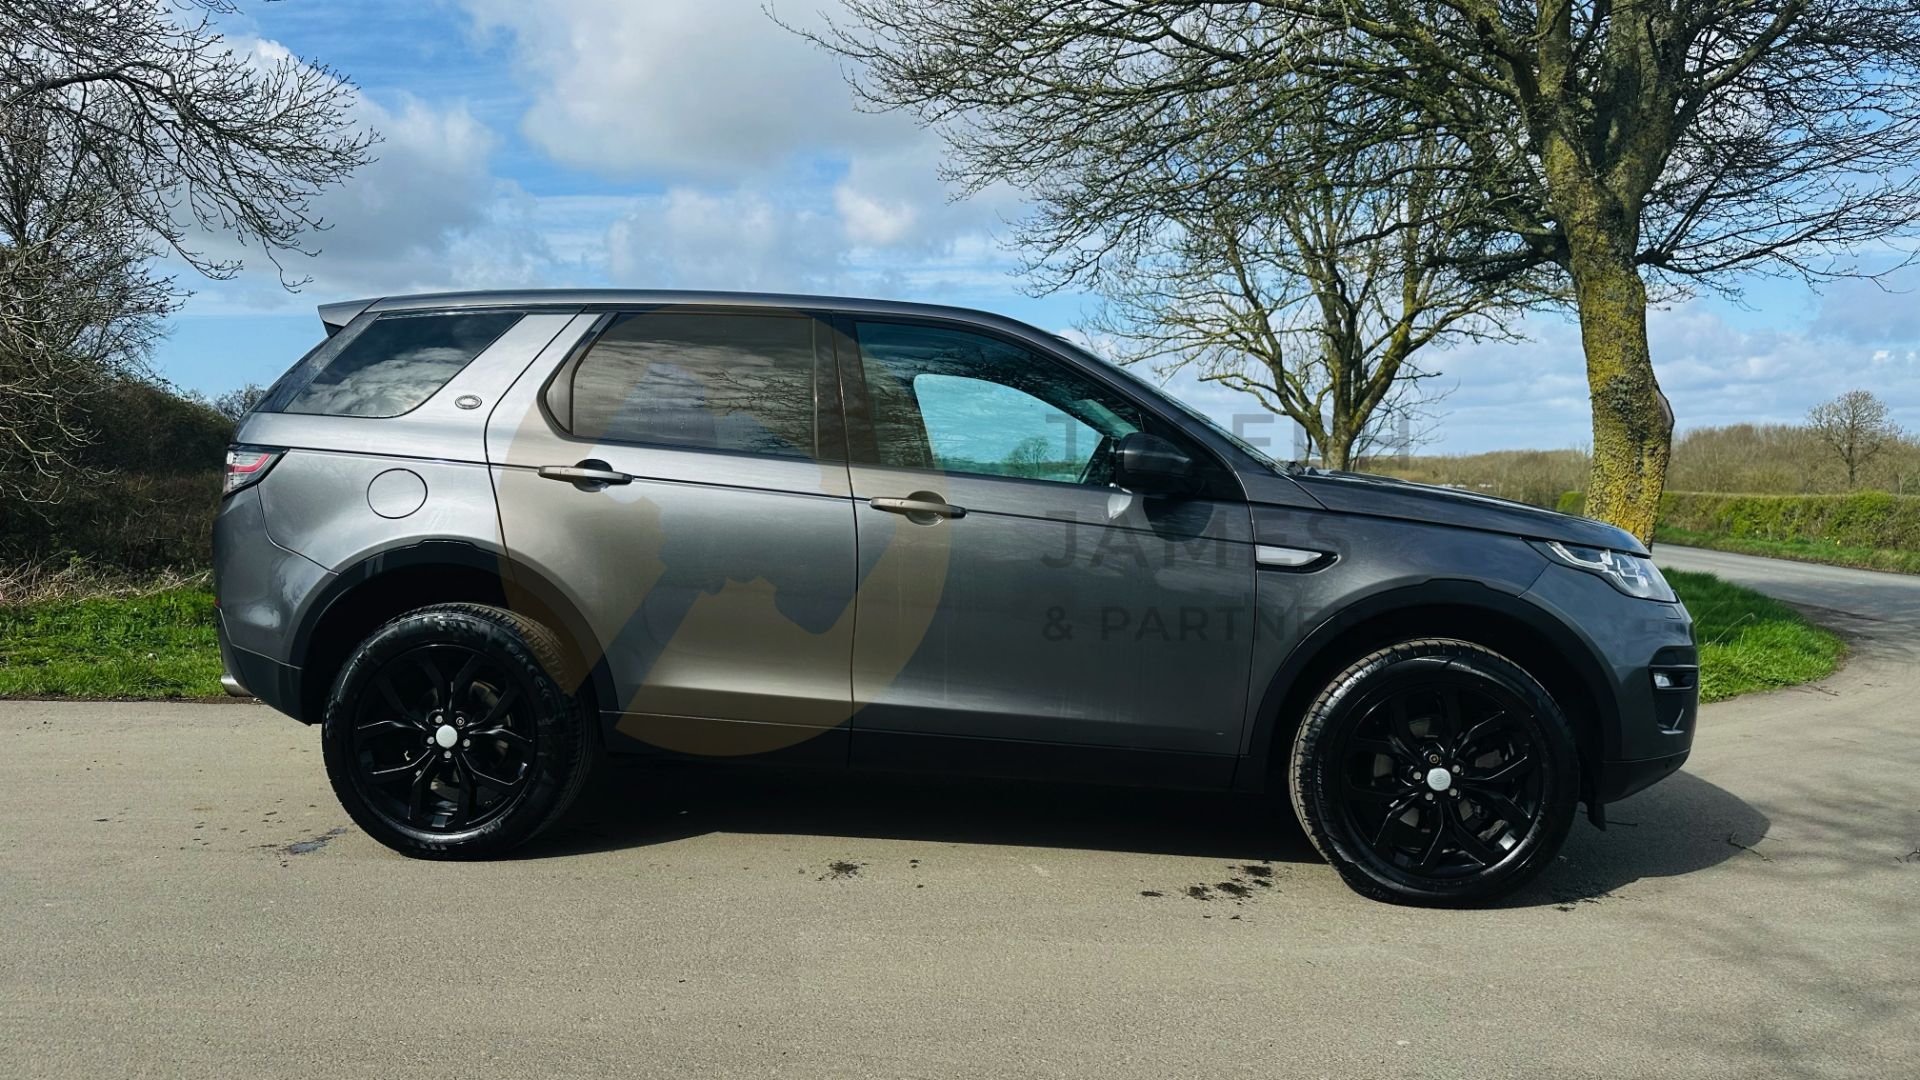 (On Sale) LAND ROVER DISCOVERY SPORT *HSE EDITION* 7 SEATER SUV (2017 - EURO 6) 2.0 TD4 - AUTOMATIC - Image 14 of 48